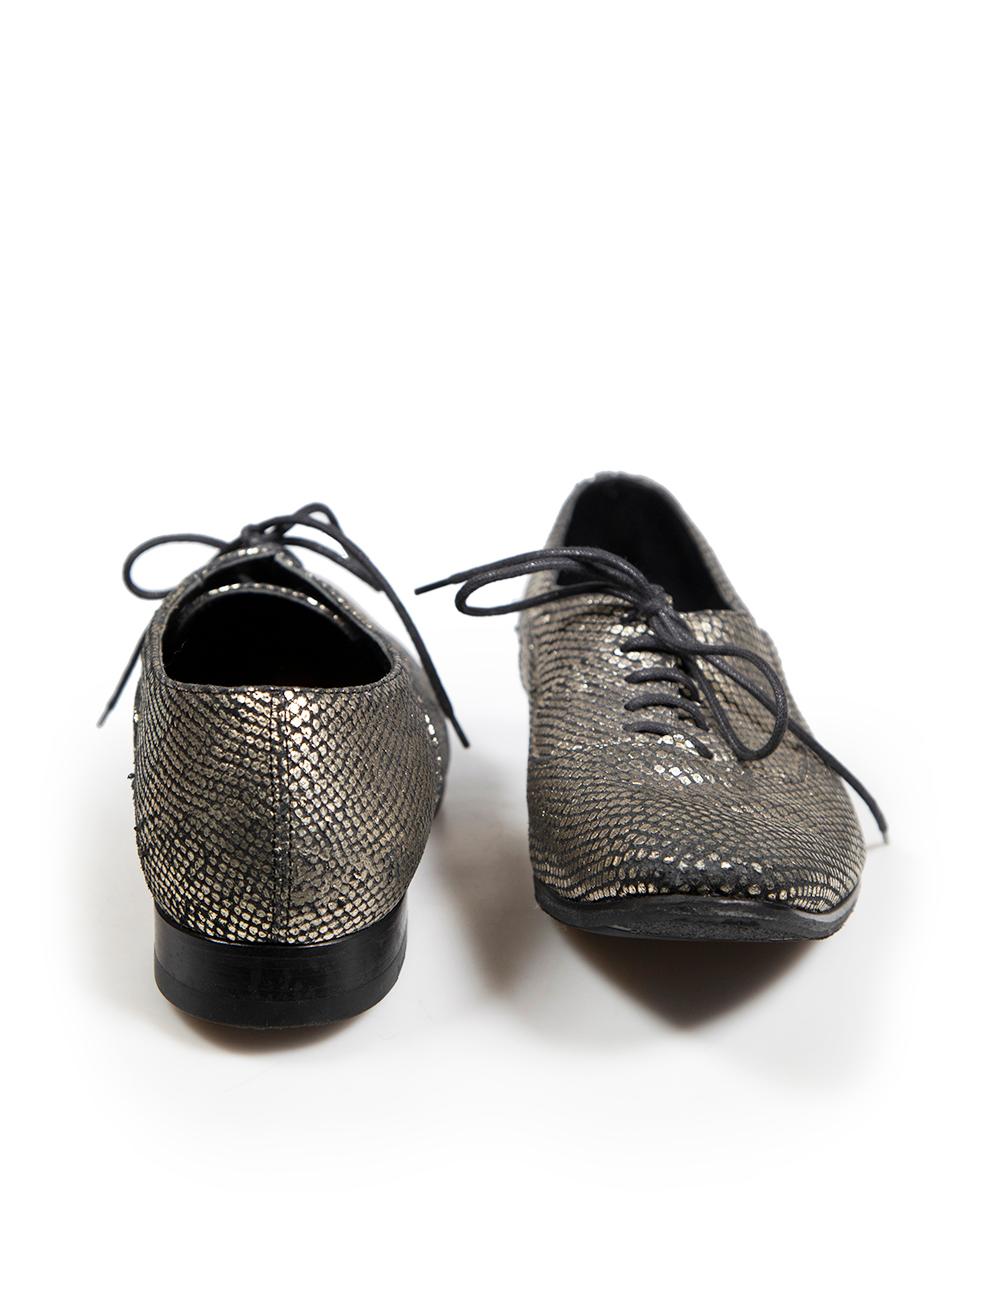 Saint Laurent Silver Suede Print Lace Up Oxfords Size IT 36.5 In Good Condition For Sale In London, GB